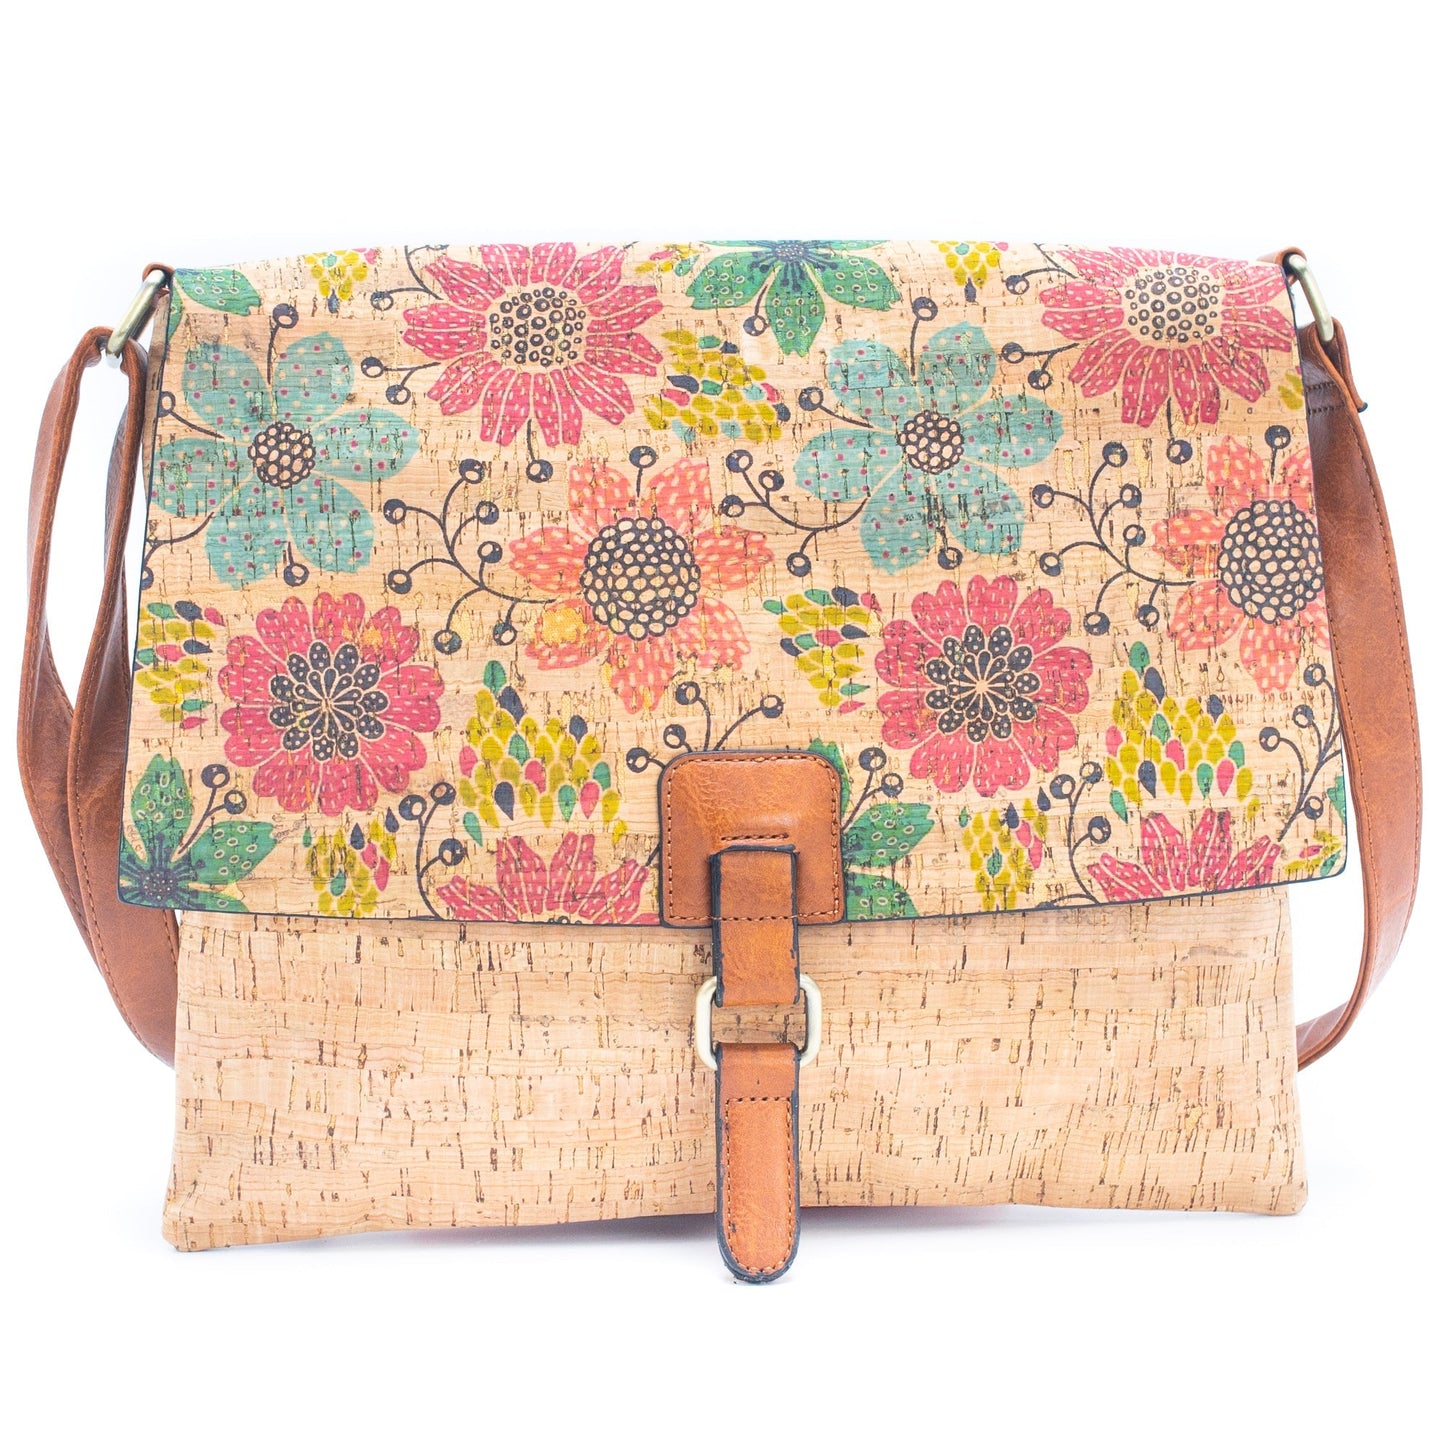 Natural Cork Crossbody Bag w/ Beautiful Patterns | THE CORK COLLECTION